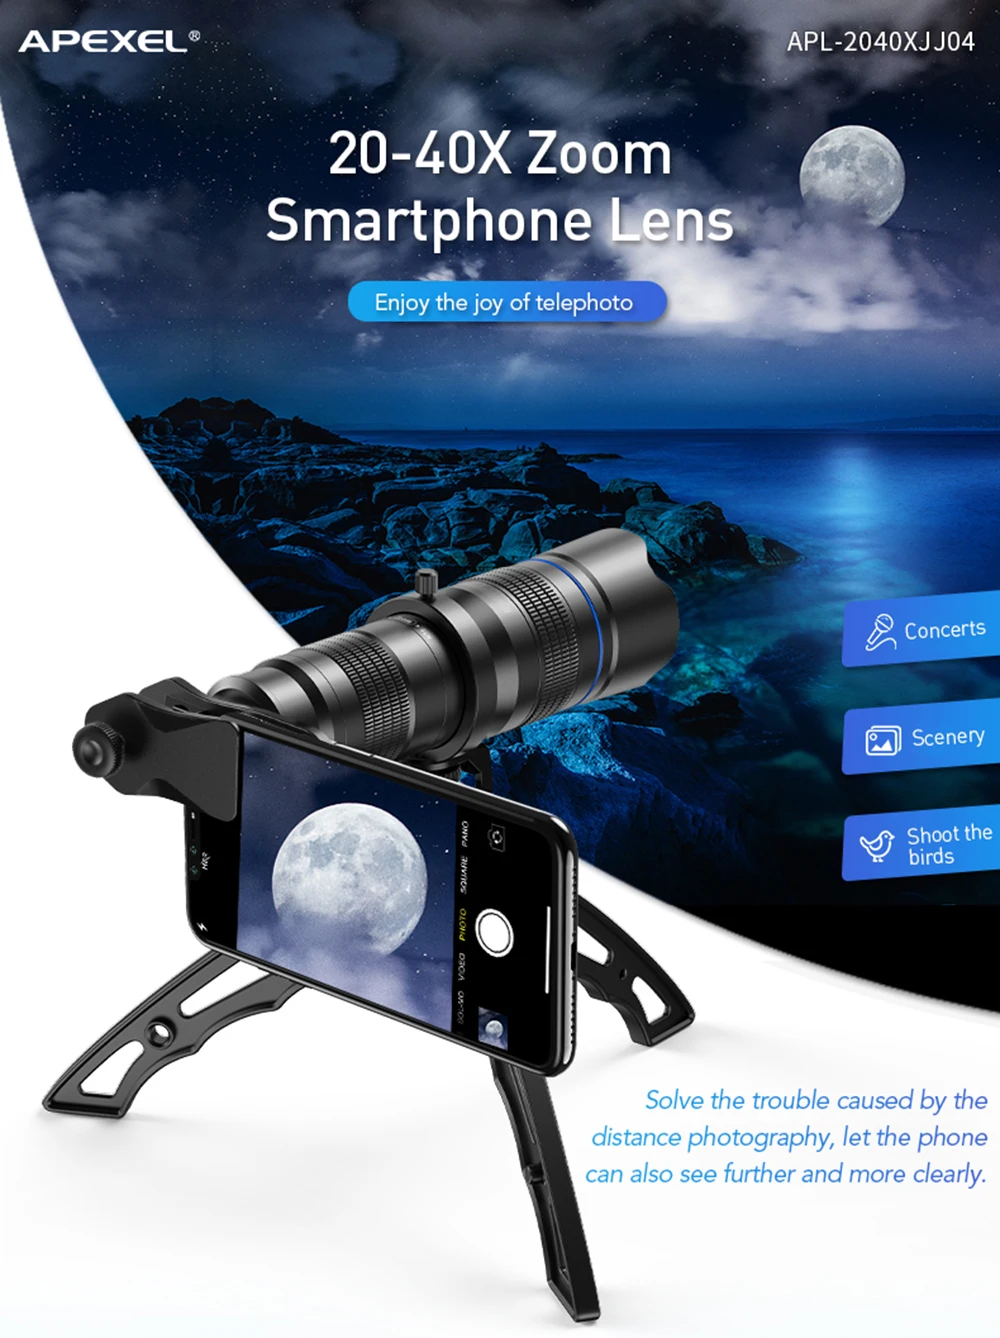 20-40x Zoom smartphone lens - Smart Cell Direct 